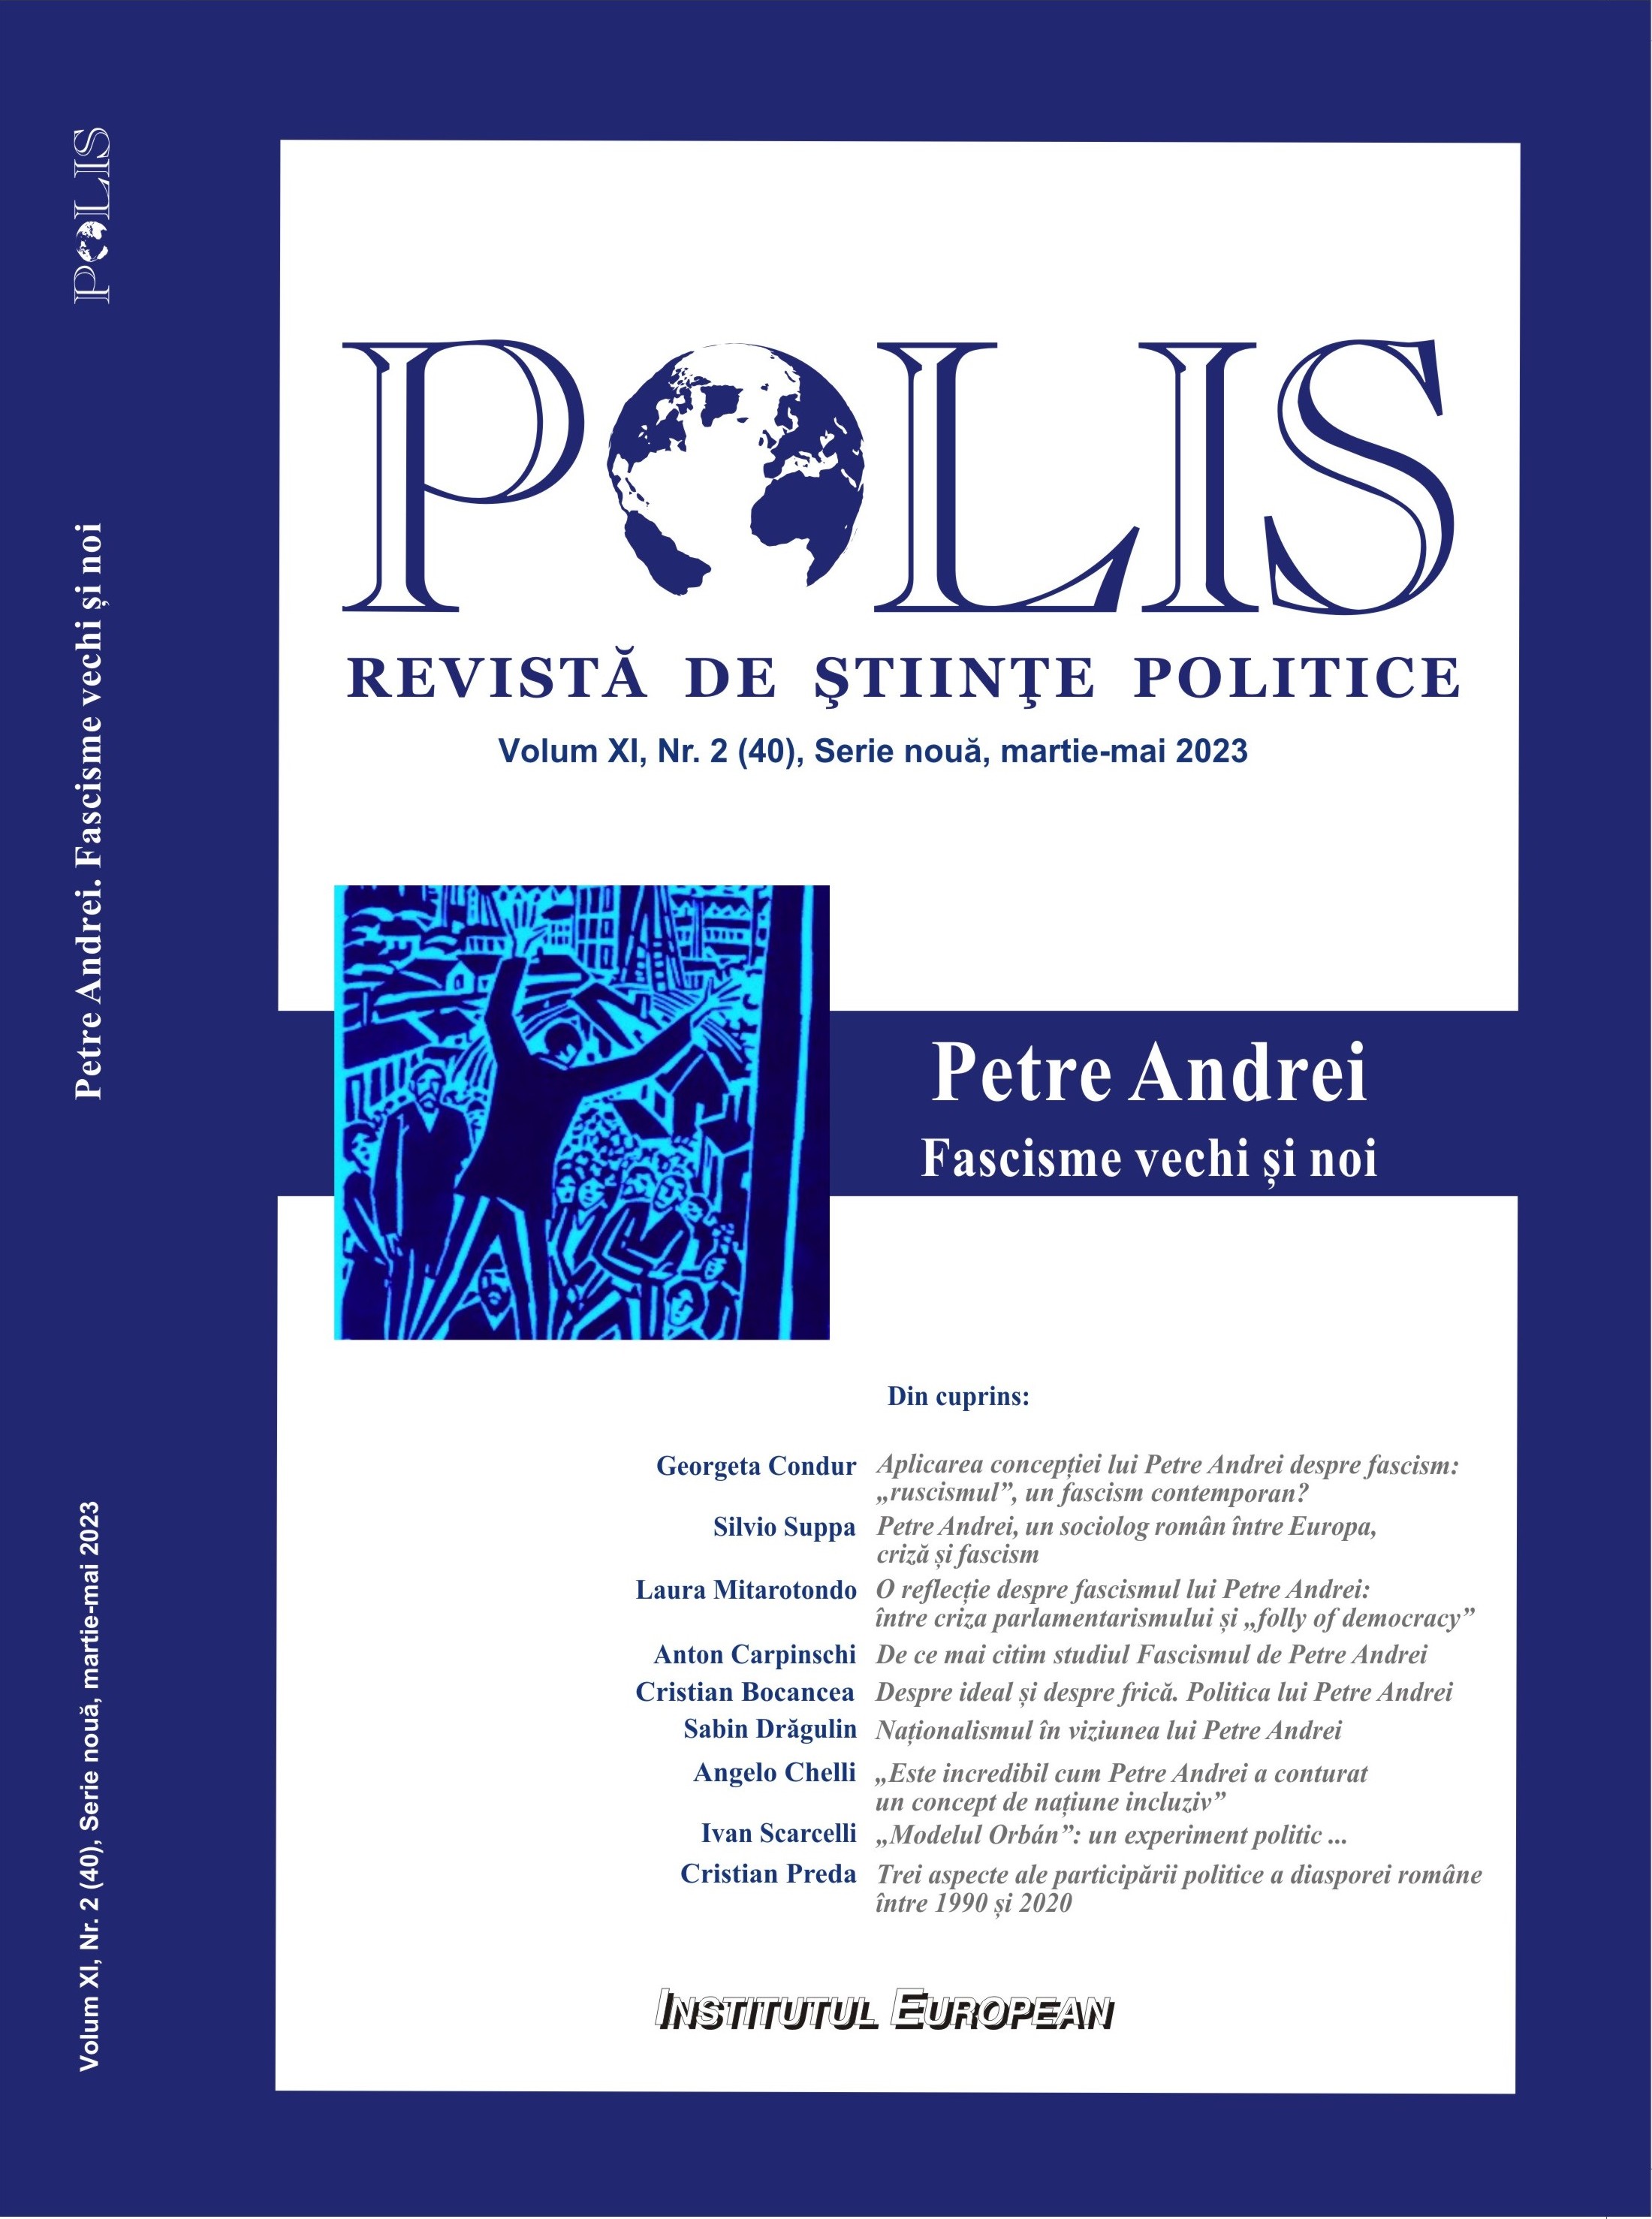 Nationalism in the vision of Petre Andrei Cover Image